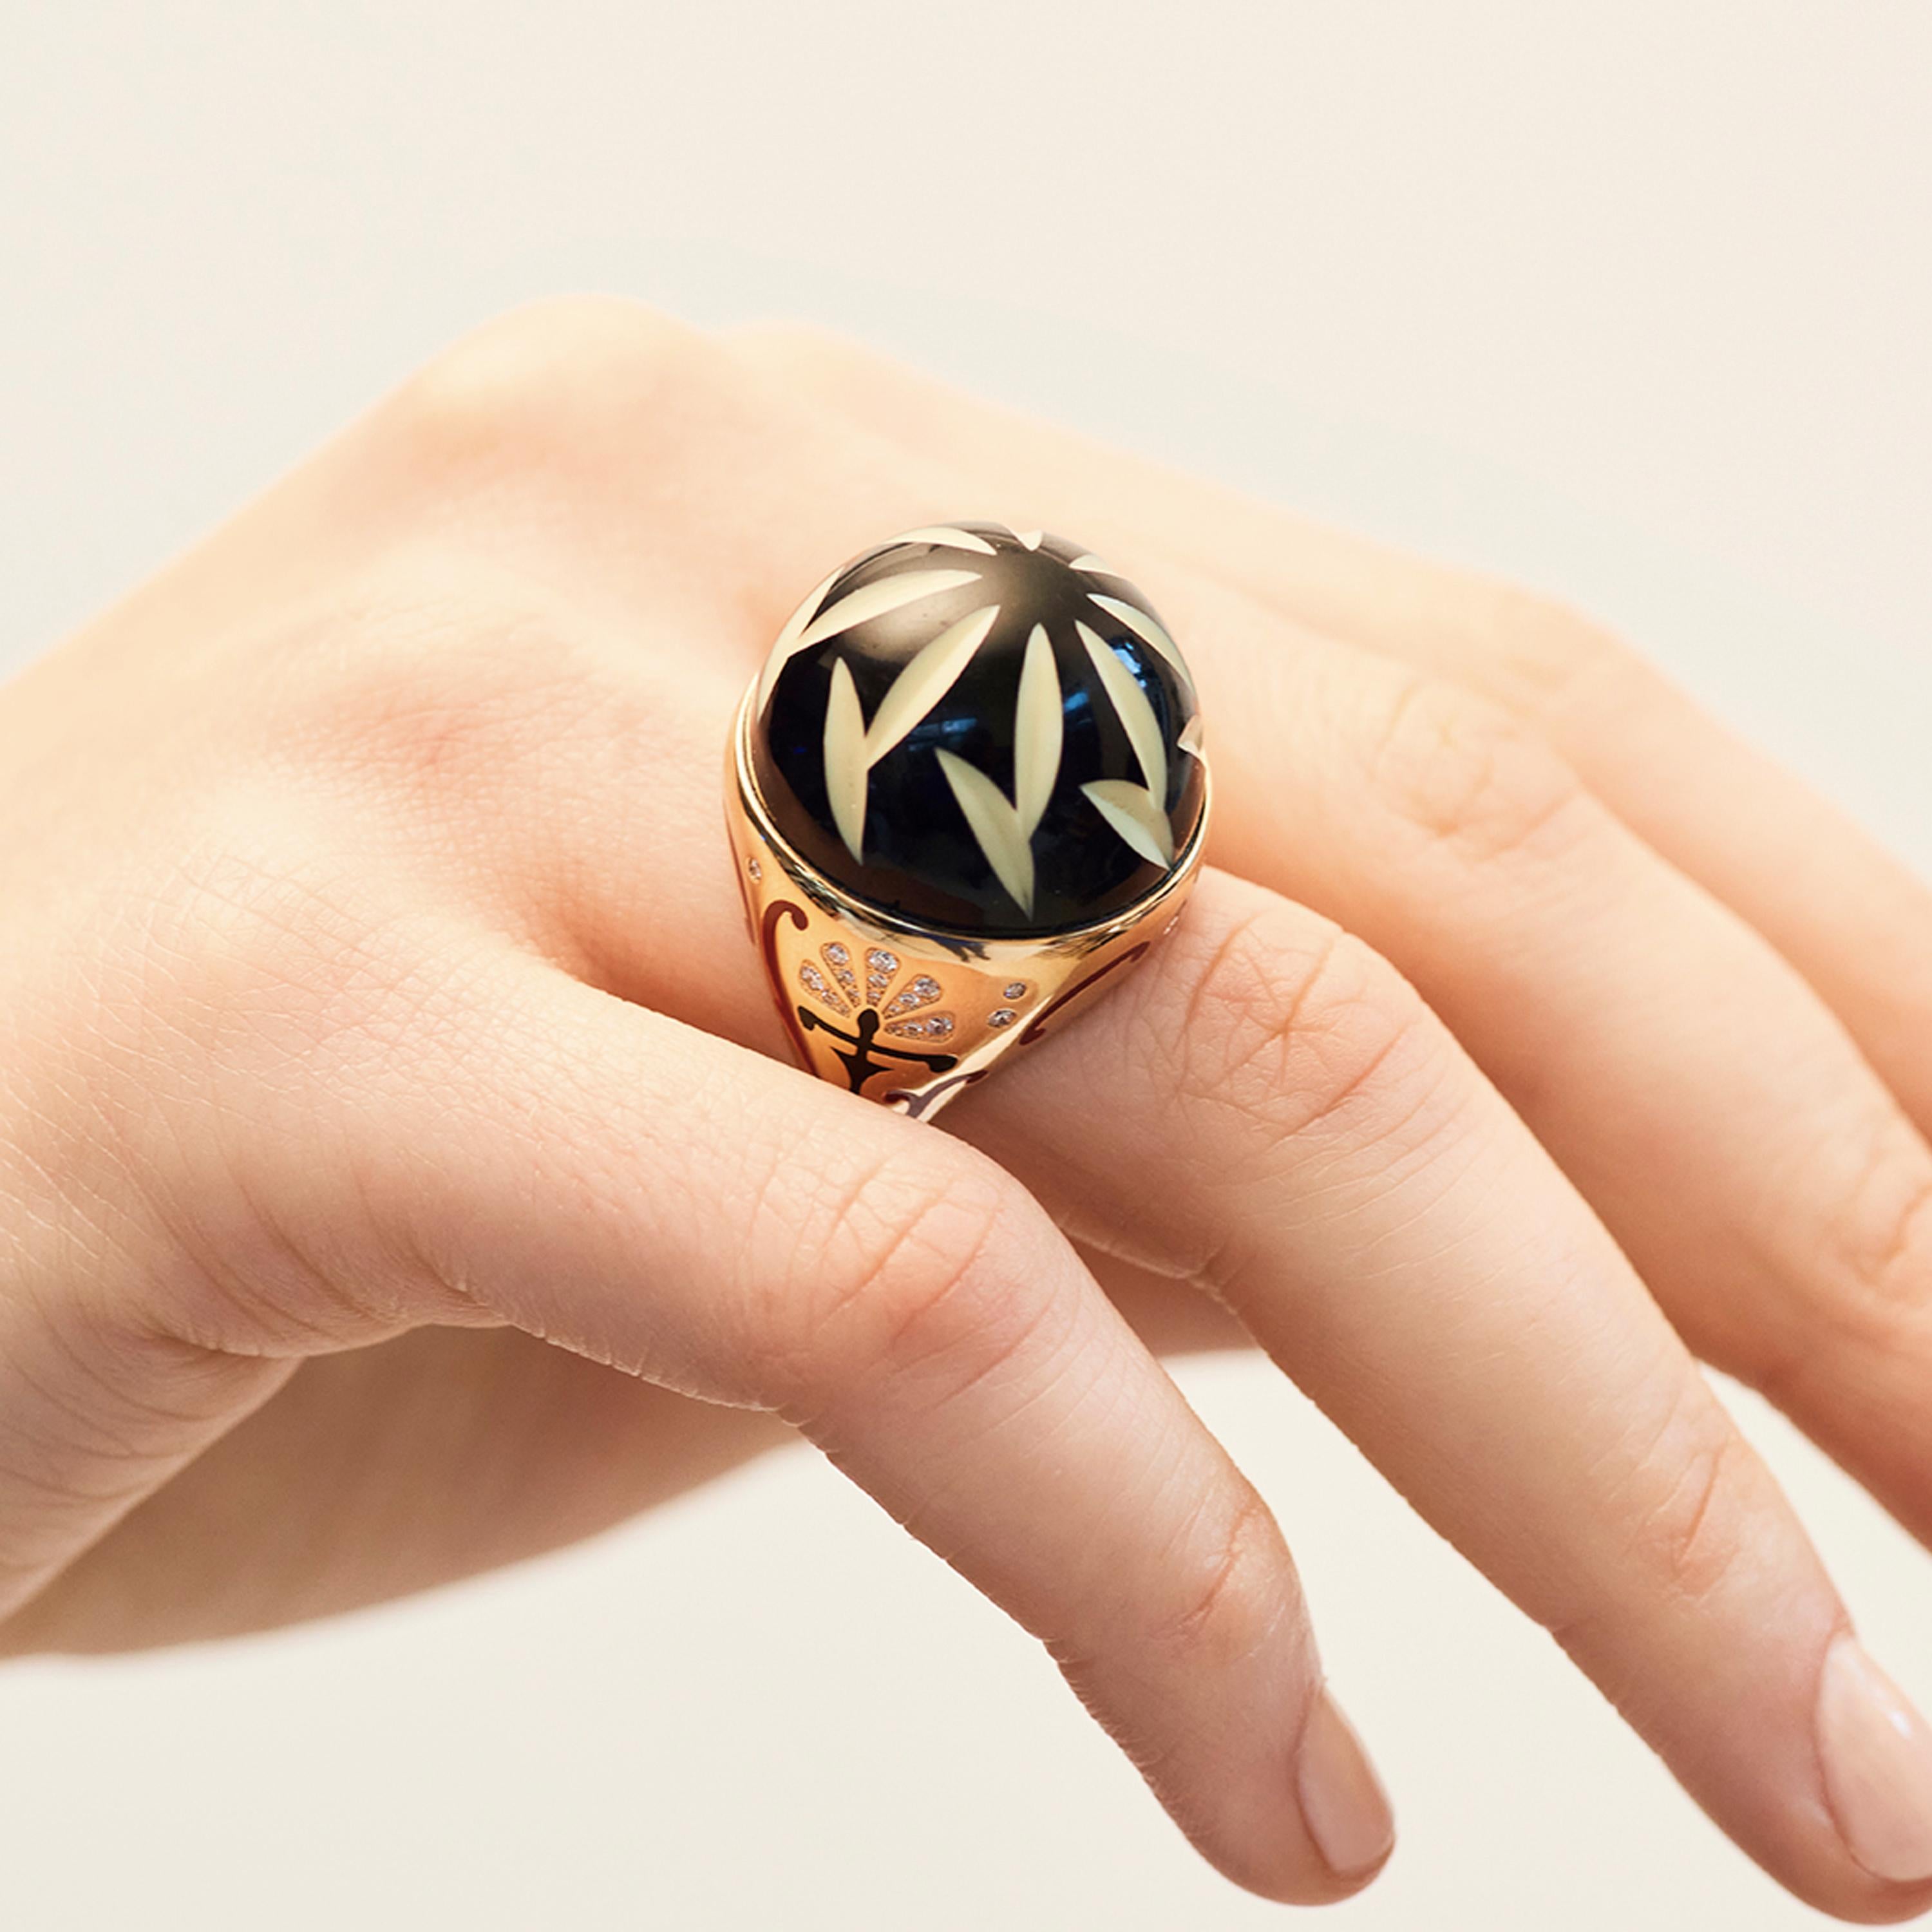 Francesca Villa's Art Deco Style Black Flower Ring is crafted from 18 karat pink gold (14.50 g), diamonds (0.25 cts), as well as an enamel Art Deco black and cream celluloid button.

Ring size UK: N
Ring size EU: 53
Ring size US: 6.75

For many